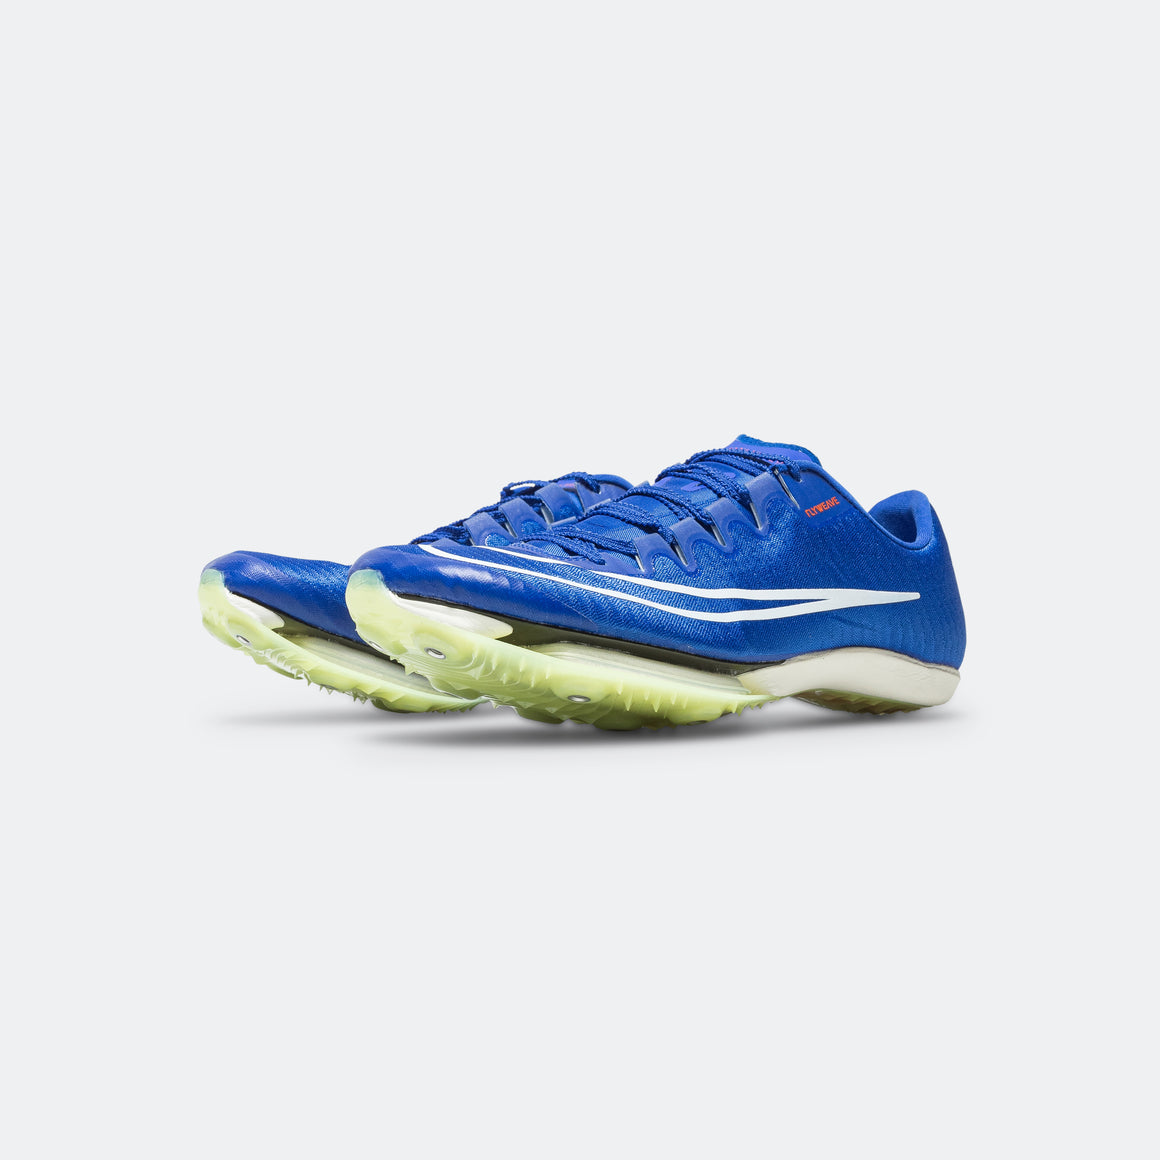 Air Zoom Maxfly - Racer Blue/White-Lime Blast